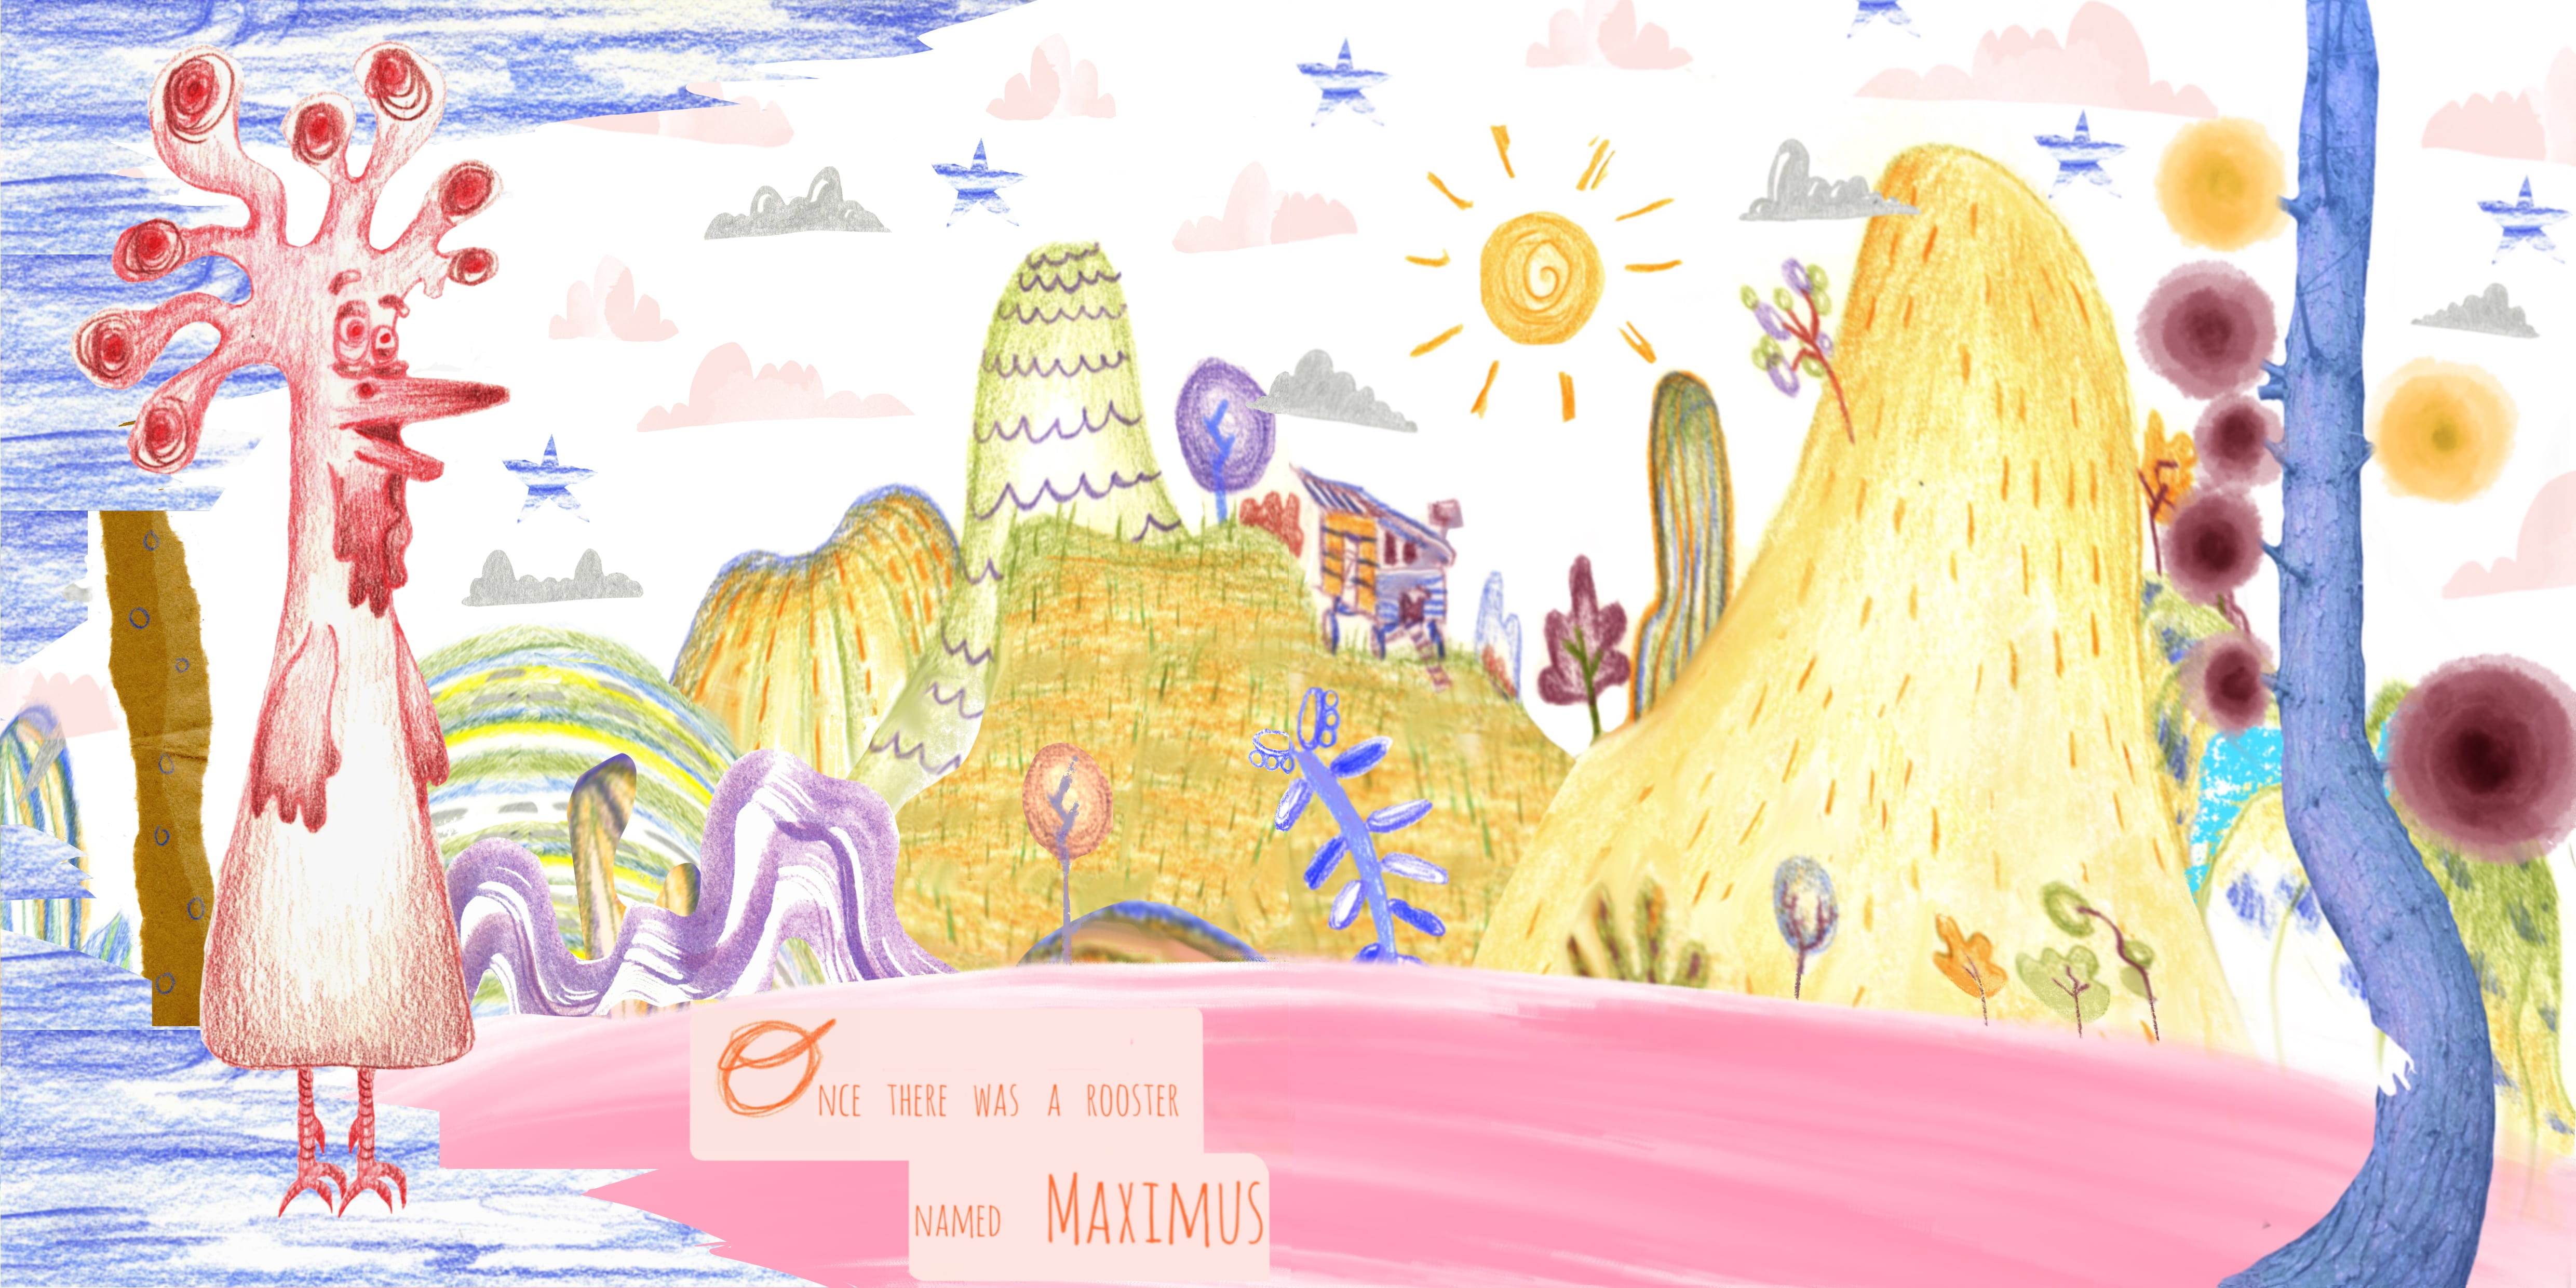 Pencil illustration of a pink rooster, standing in front of yellow hills. Text in the bottom middle of image reading: Once there was a rooster named Maximus.